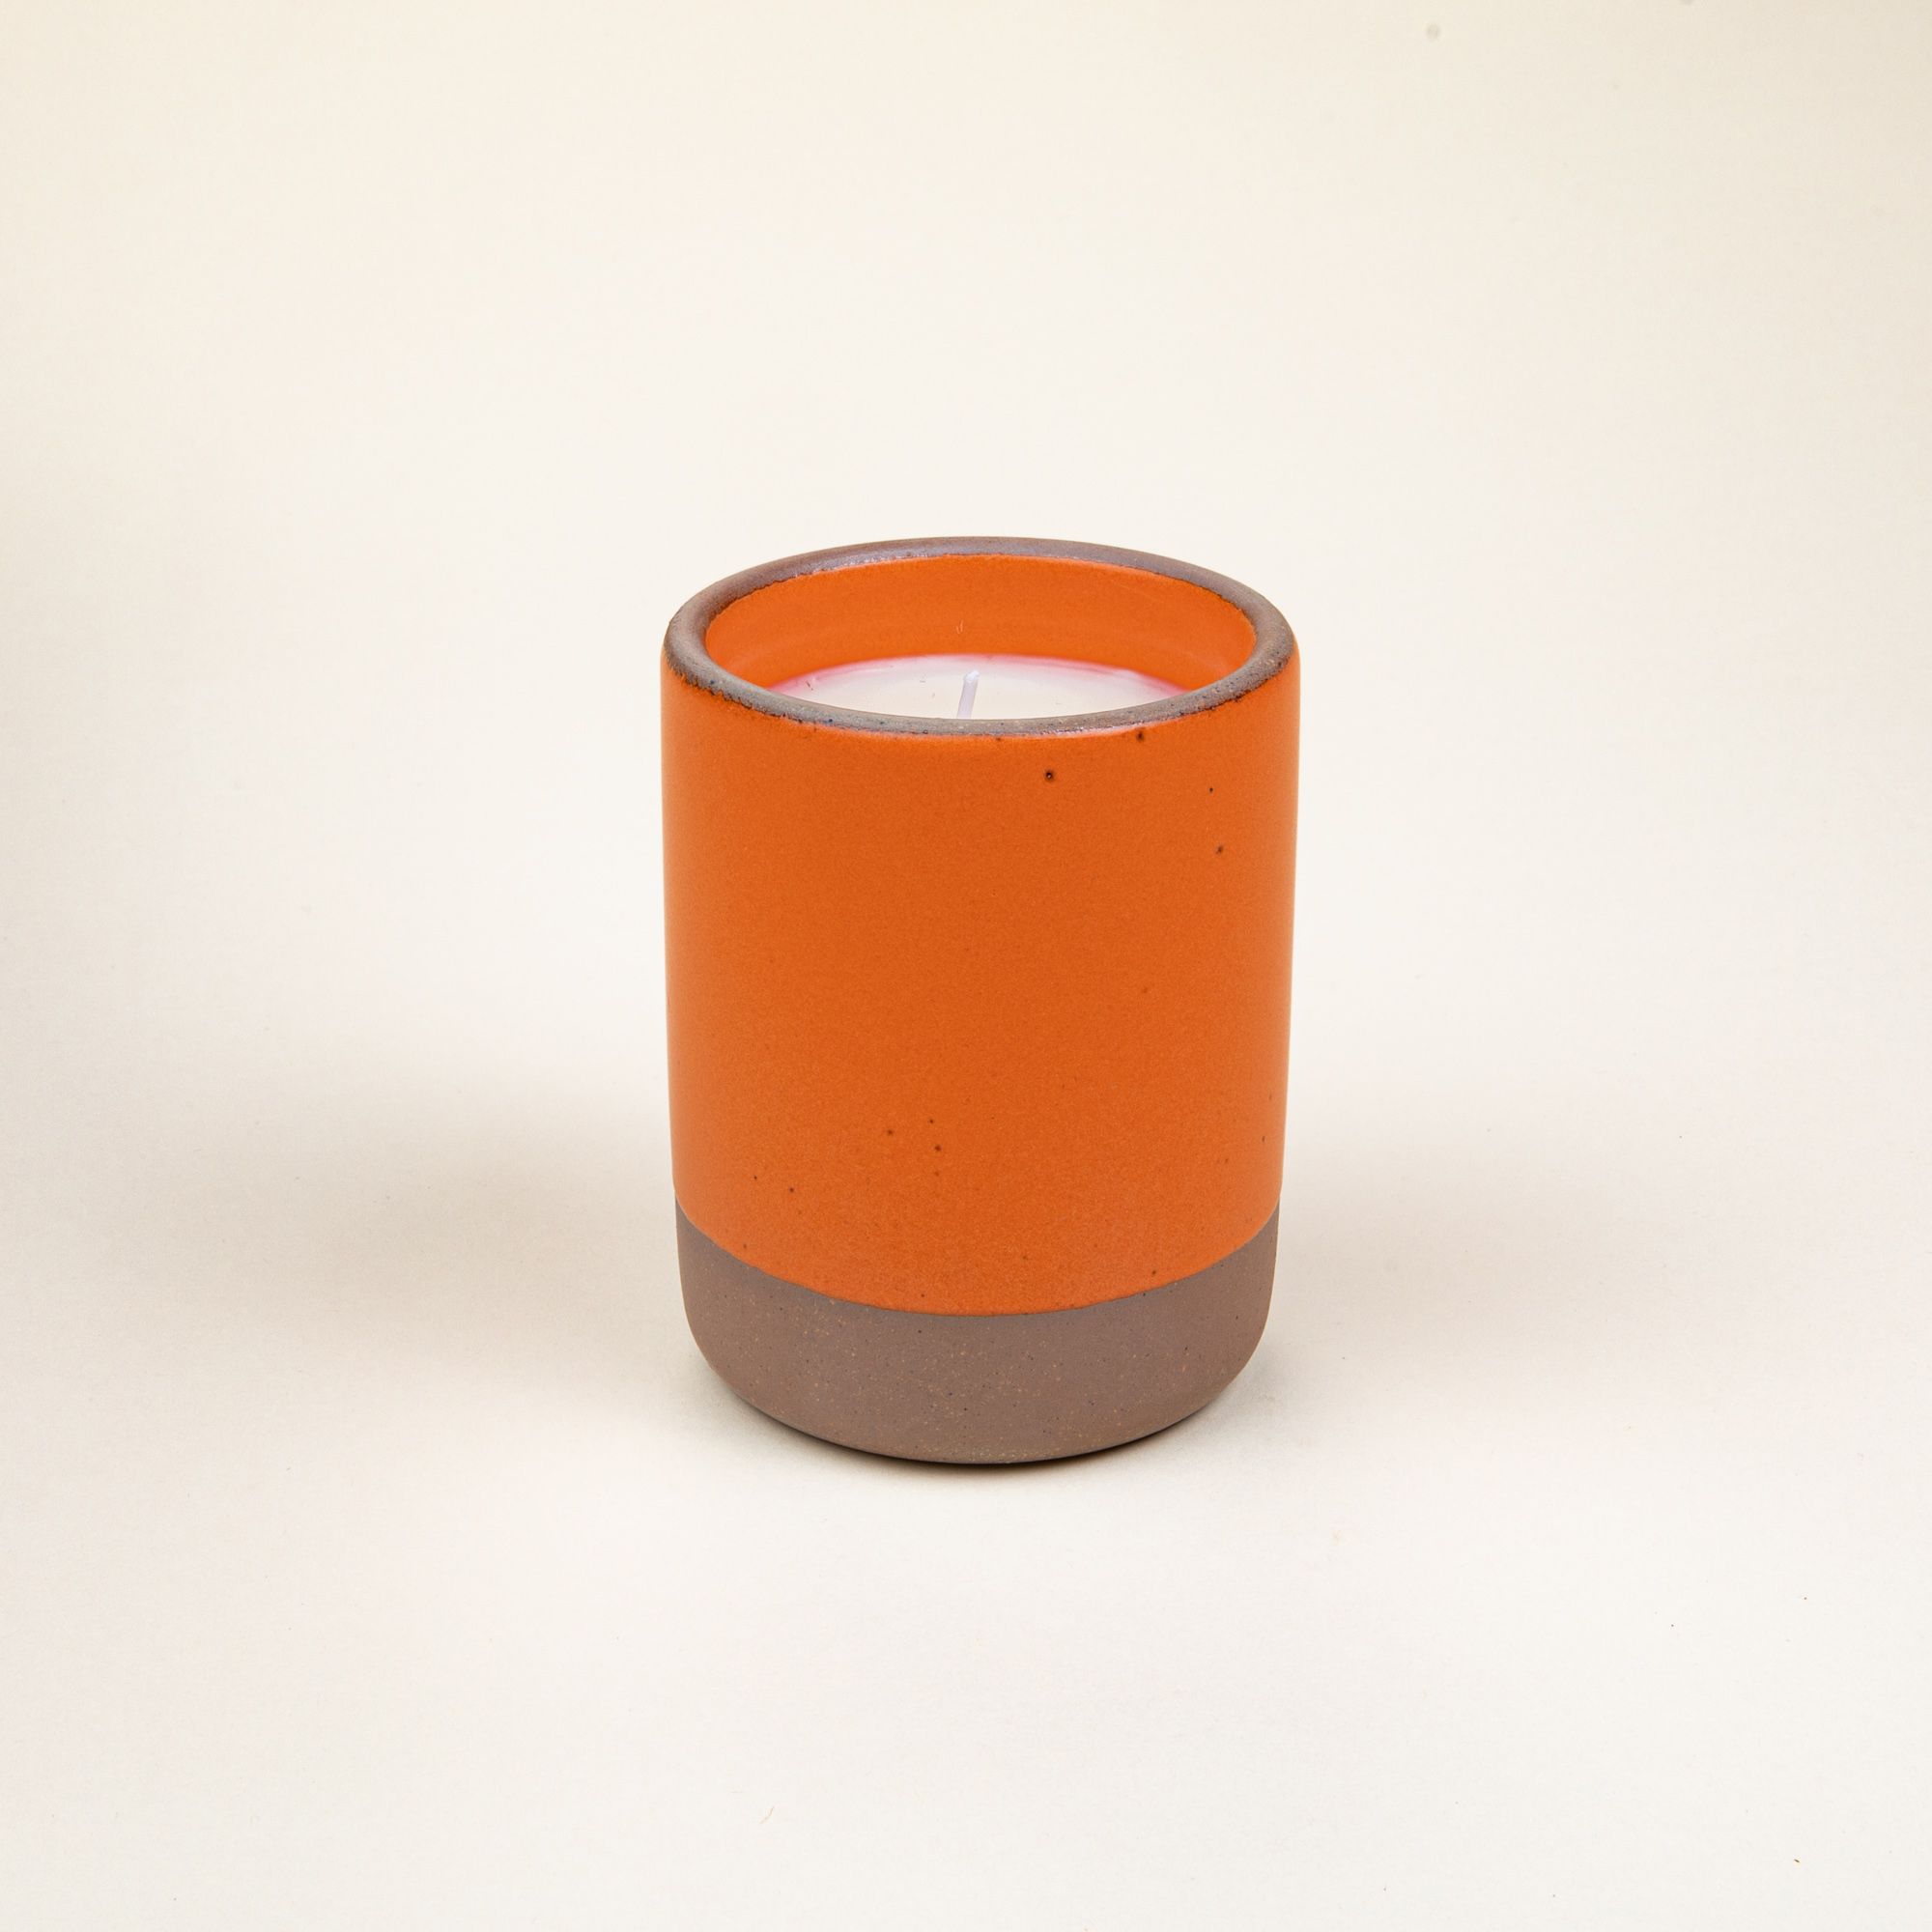 Small ceramic vessel in a bold orange color with candle inside.